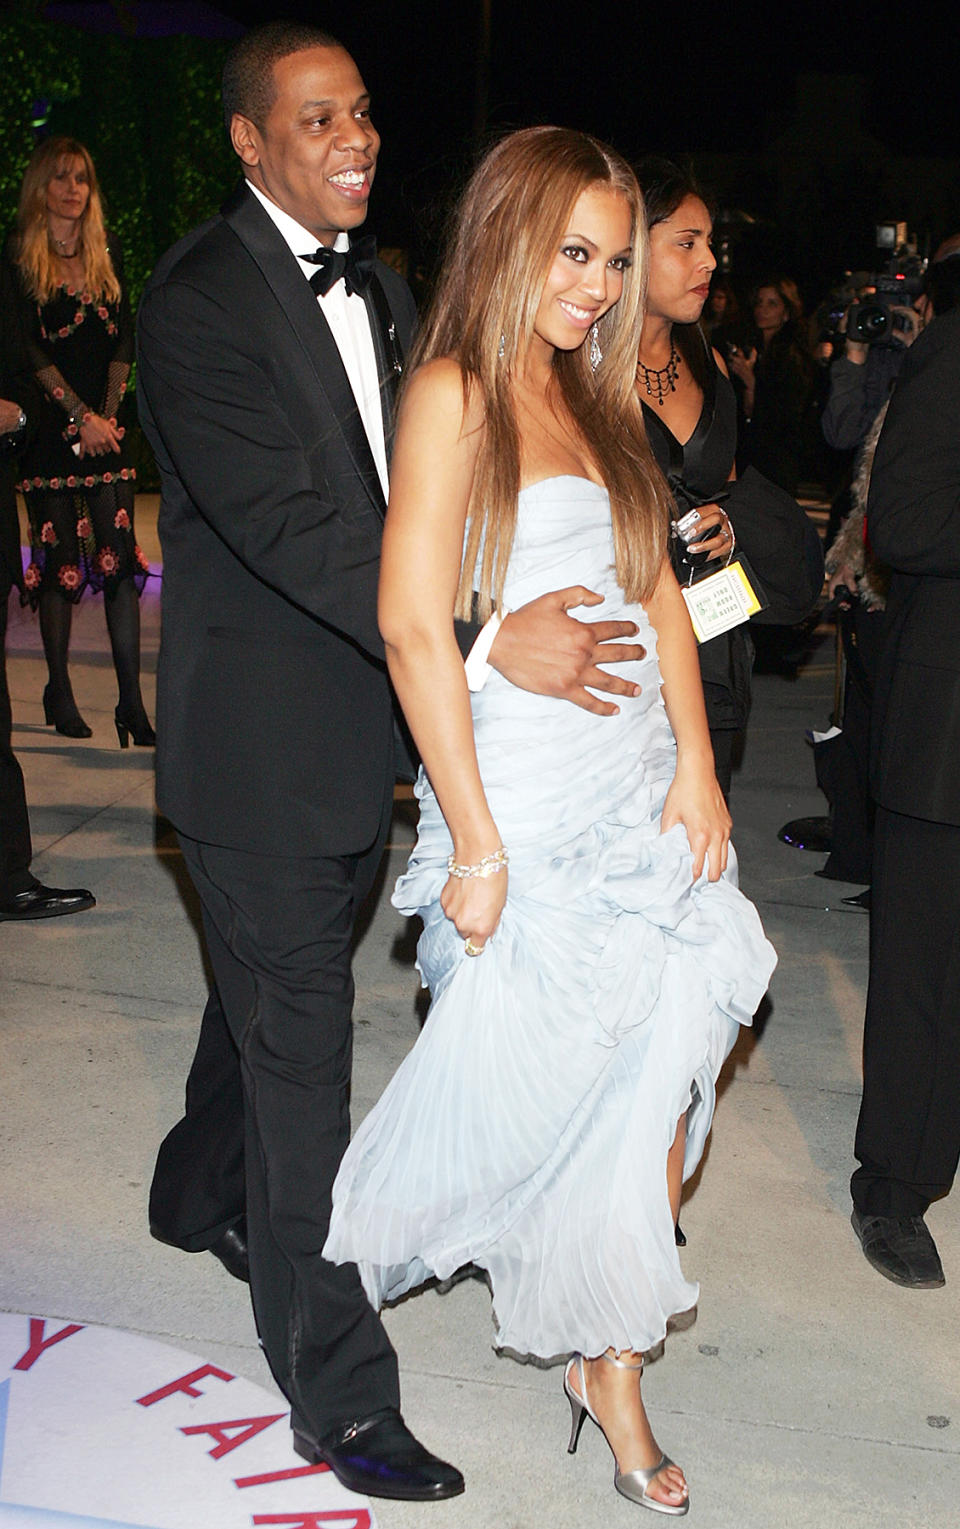 Jay-Z and Beyoncé celebrated at the Vanity Fair Oscar Party in February 2005.